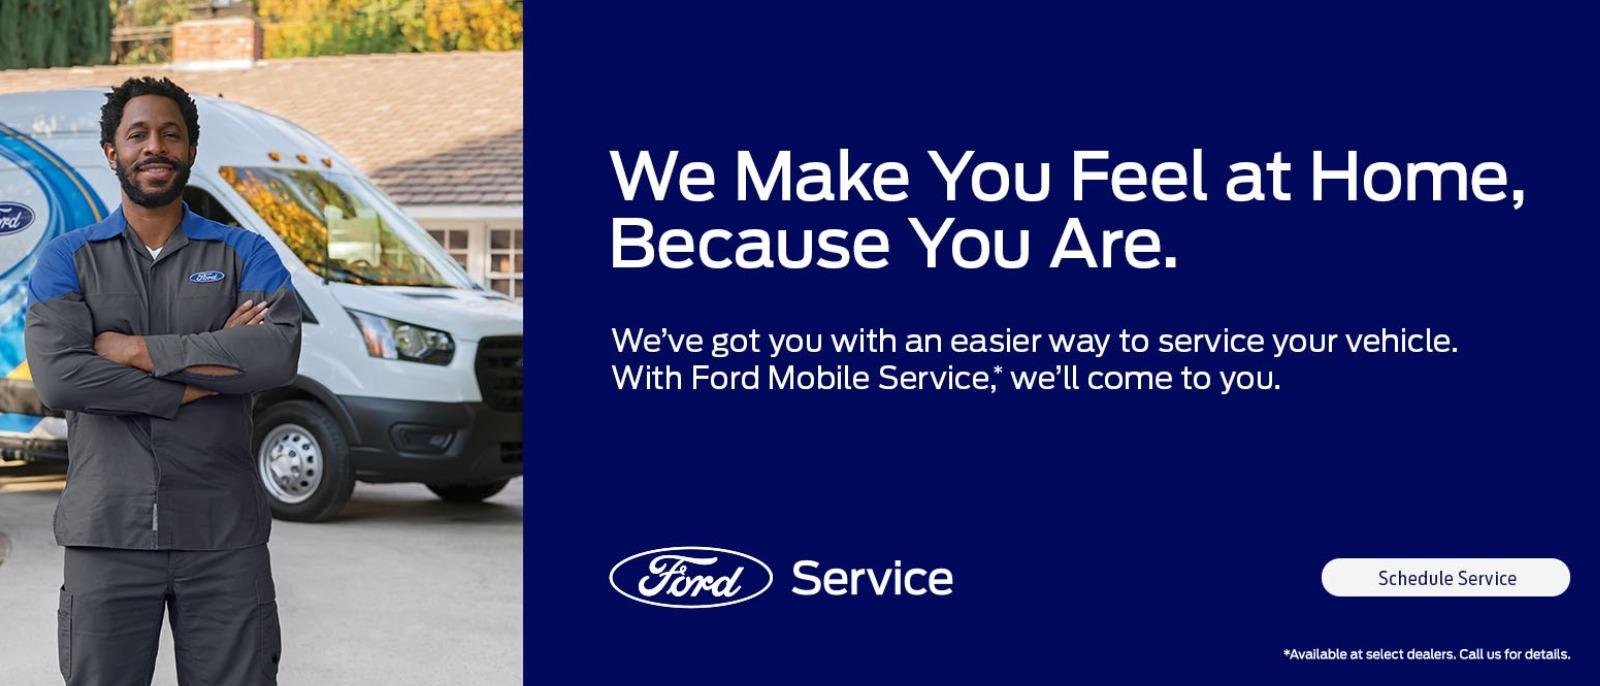 We Make You Feel at Home, Because You Are. We've got you with an easier way to service your vehicle. With Ford Mobile Service, we'll come to you.